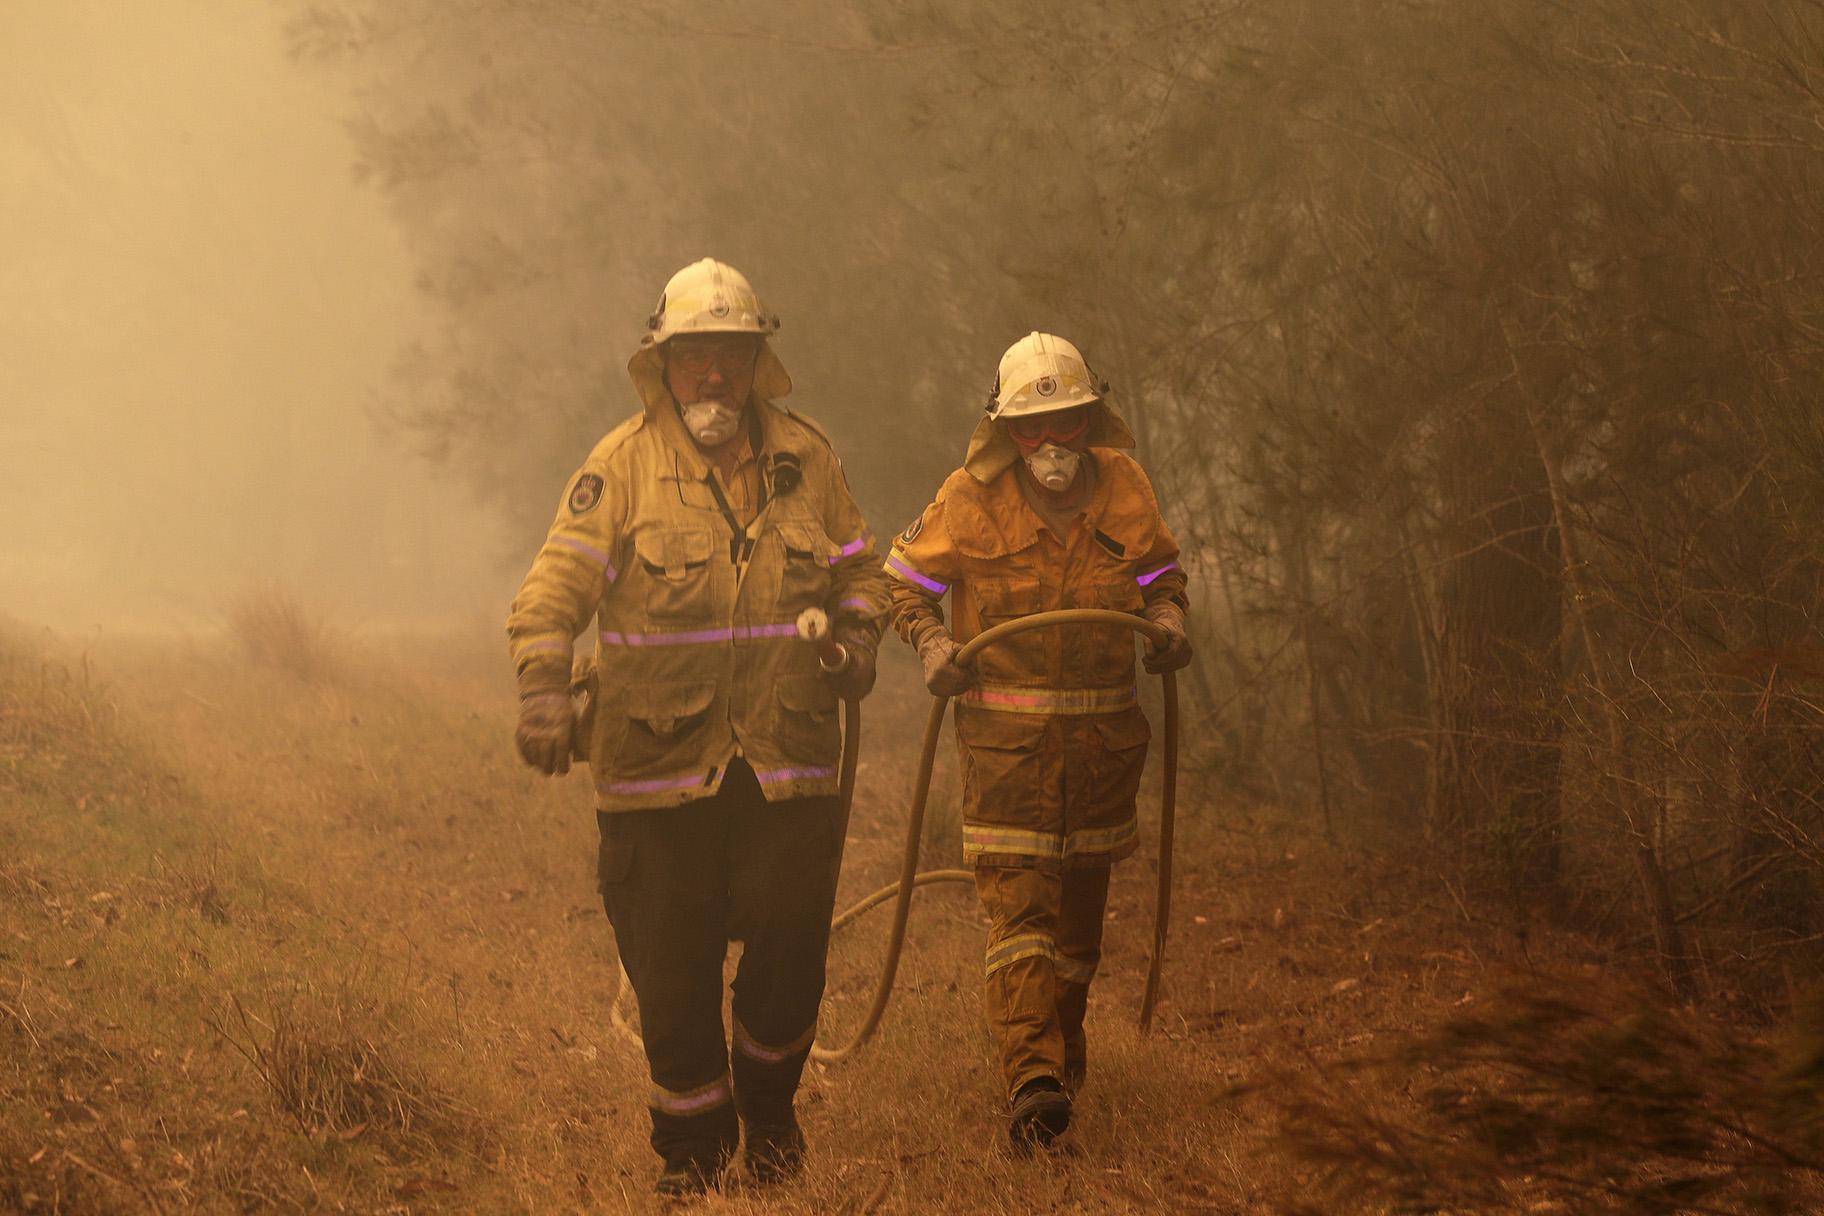 Firefighters drag their water hose after putting out a spot fire near Moruya, Australia, Saturday, Jan. 4, 2020. Australia’s Prime Minister Scott Morrison called up about 3,000 reservists as the threat of wildfires escalated Saturday in at least three states with two more deaths, and strong winds and high temperatures were forecast to bring flames to populated areas including the suburbs of Sydney. (AP Photo / Rick Rycroft)